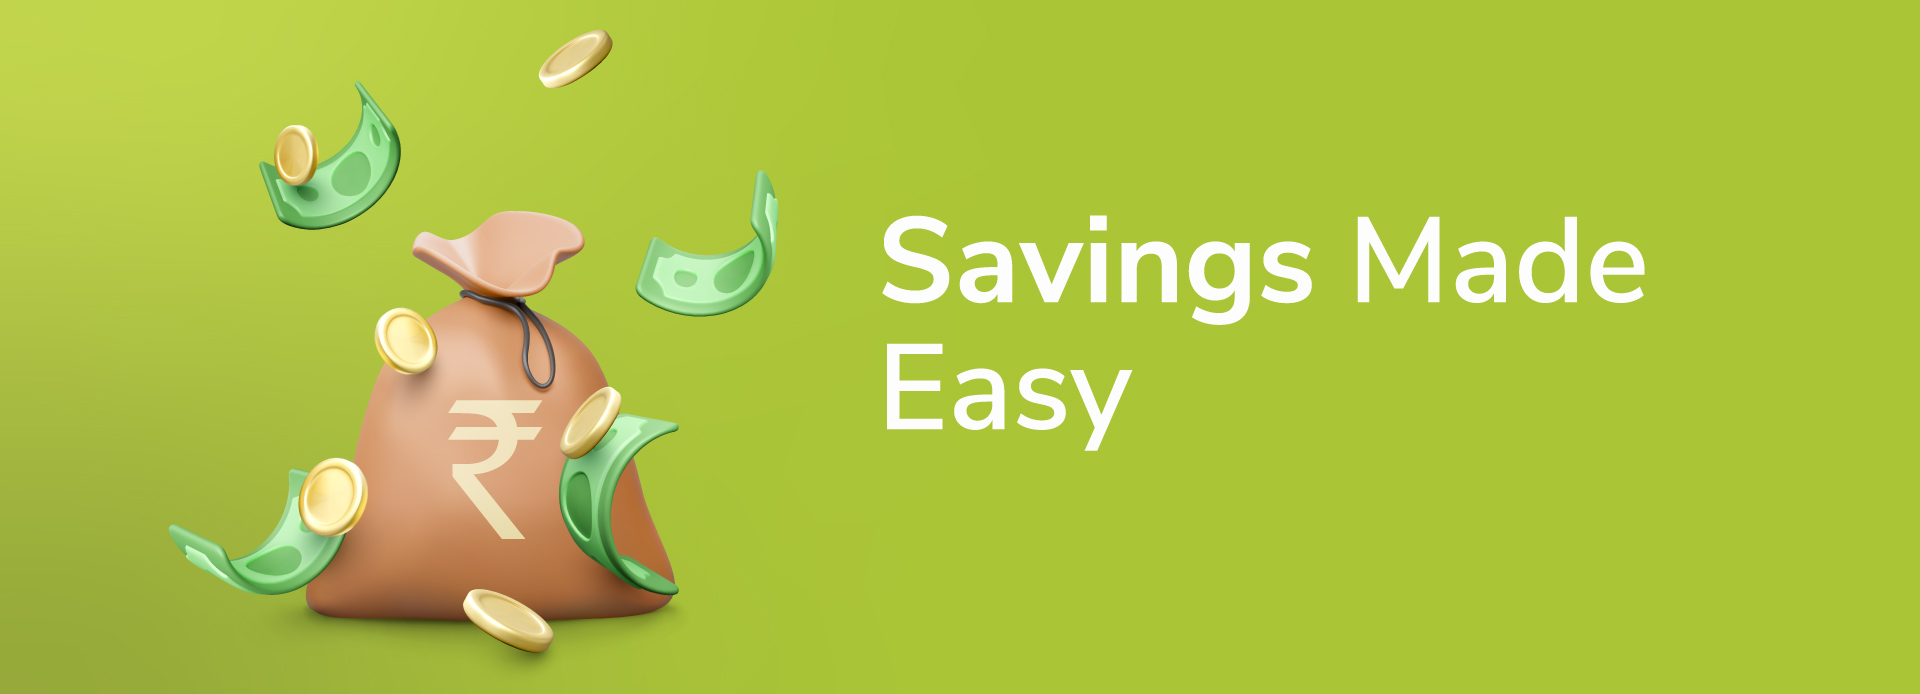 Savings made easy with INDIE. Earn up to 6.75% interest p.a.